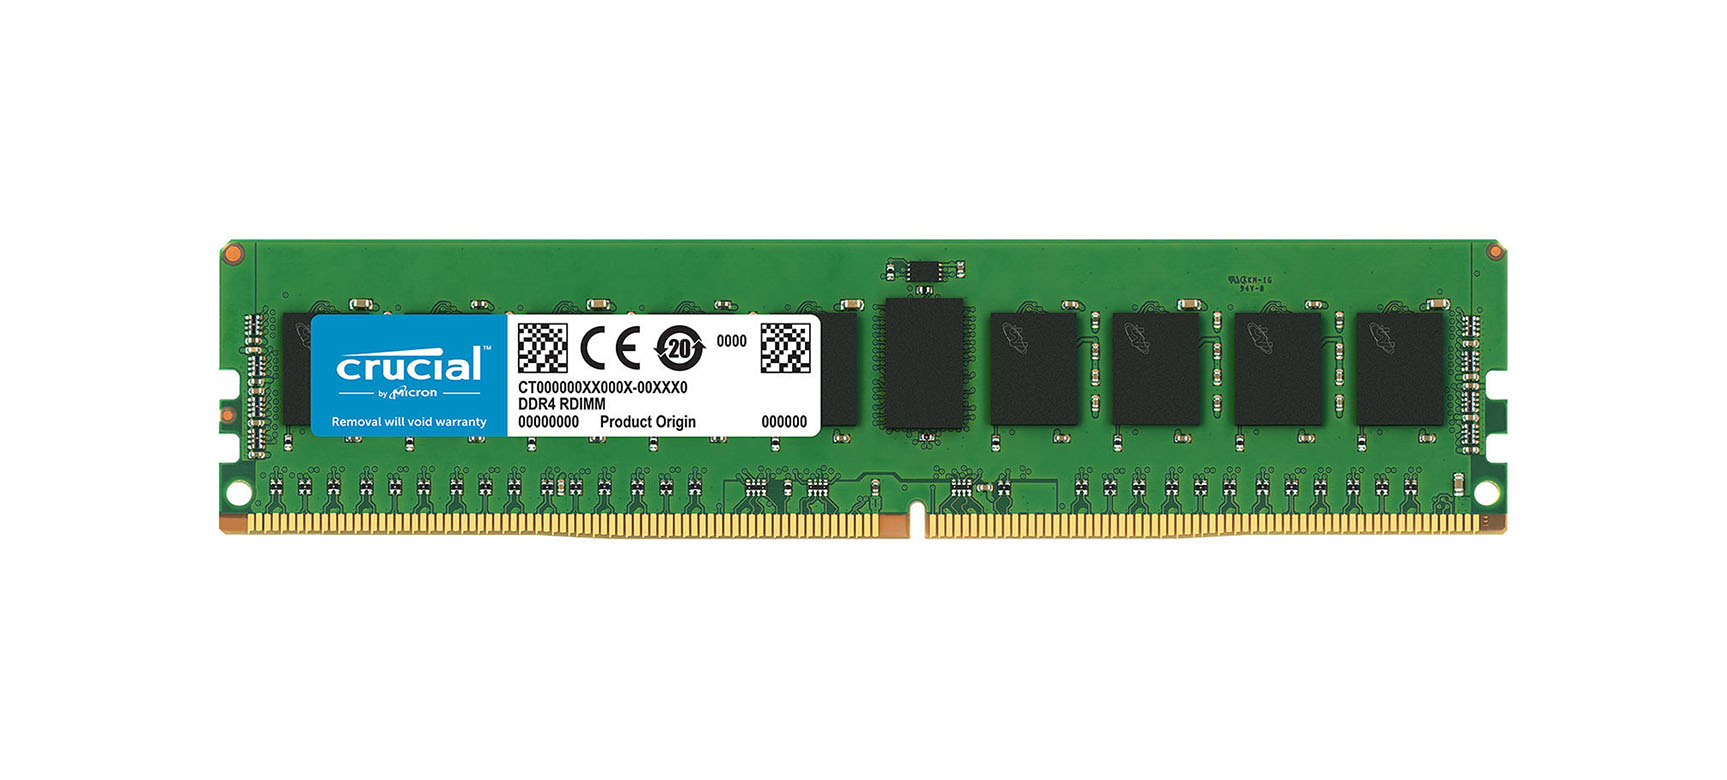 Crucial CT7743639 16GB DDR4-2133MHz PC4-17000 ECC Registered CL15 288-Pin DIMM Dual Rank Very Low Profile (VLP) Memory Module Upgrade for HP - Compaq ProLiant BL660c Gen9